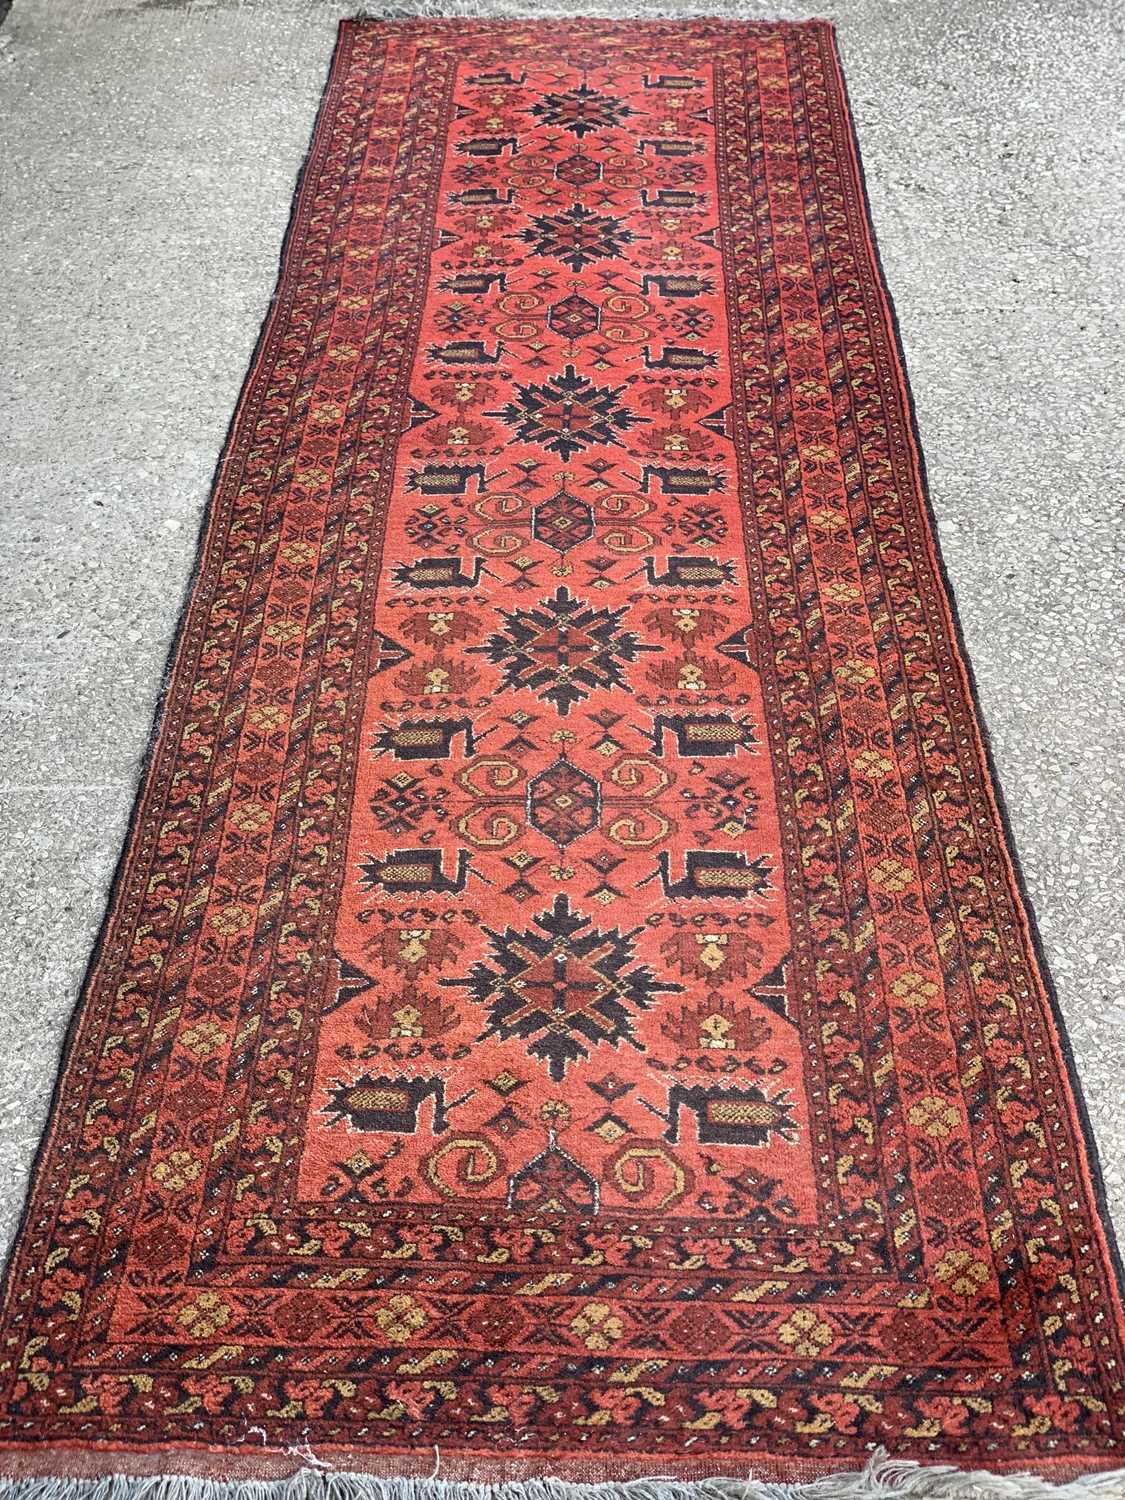 EASTERN CARPET RUNNER, red ground with multi-border and central diamond pattern, 202 x 83cms